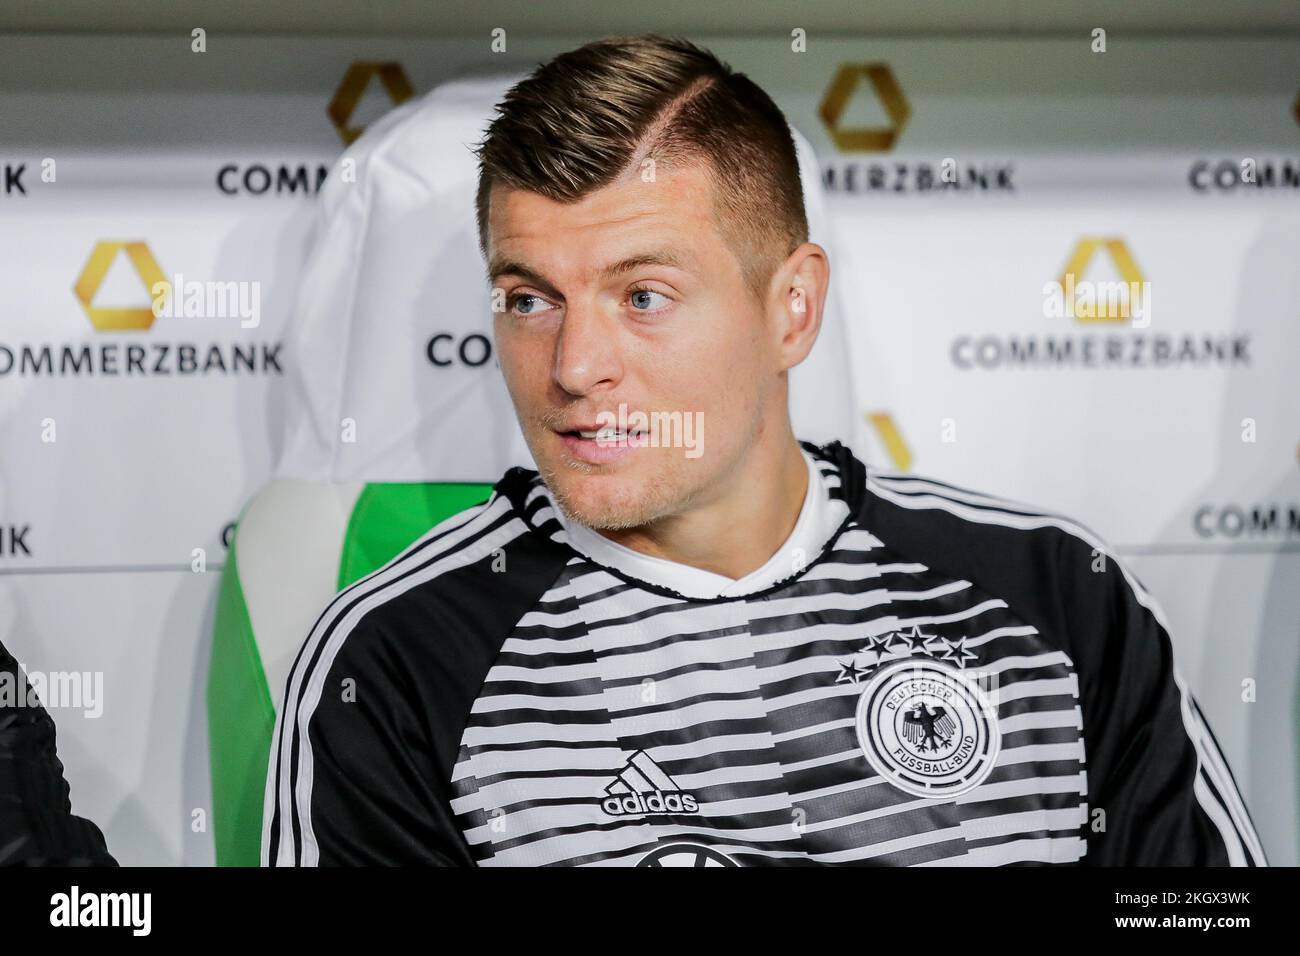 Wolfsburg, Germany, March 20, 2019: portrait of footballer Toni Kroos sitting on the bench during the international soccer game Stock Photo